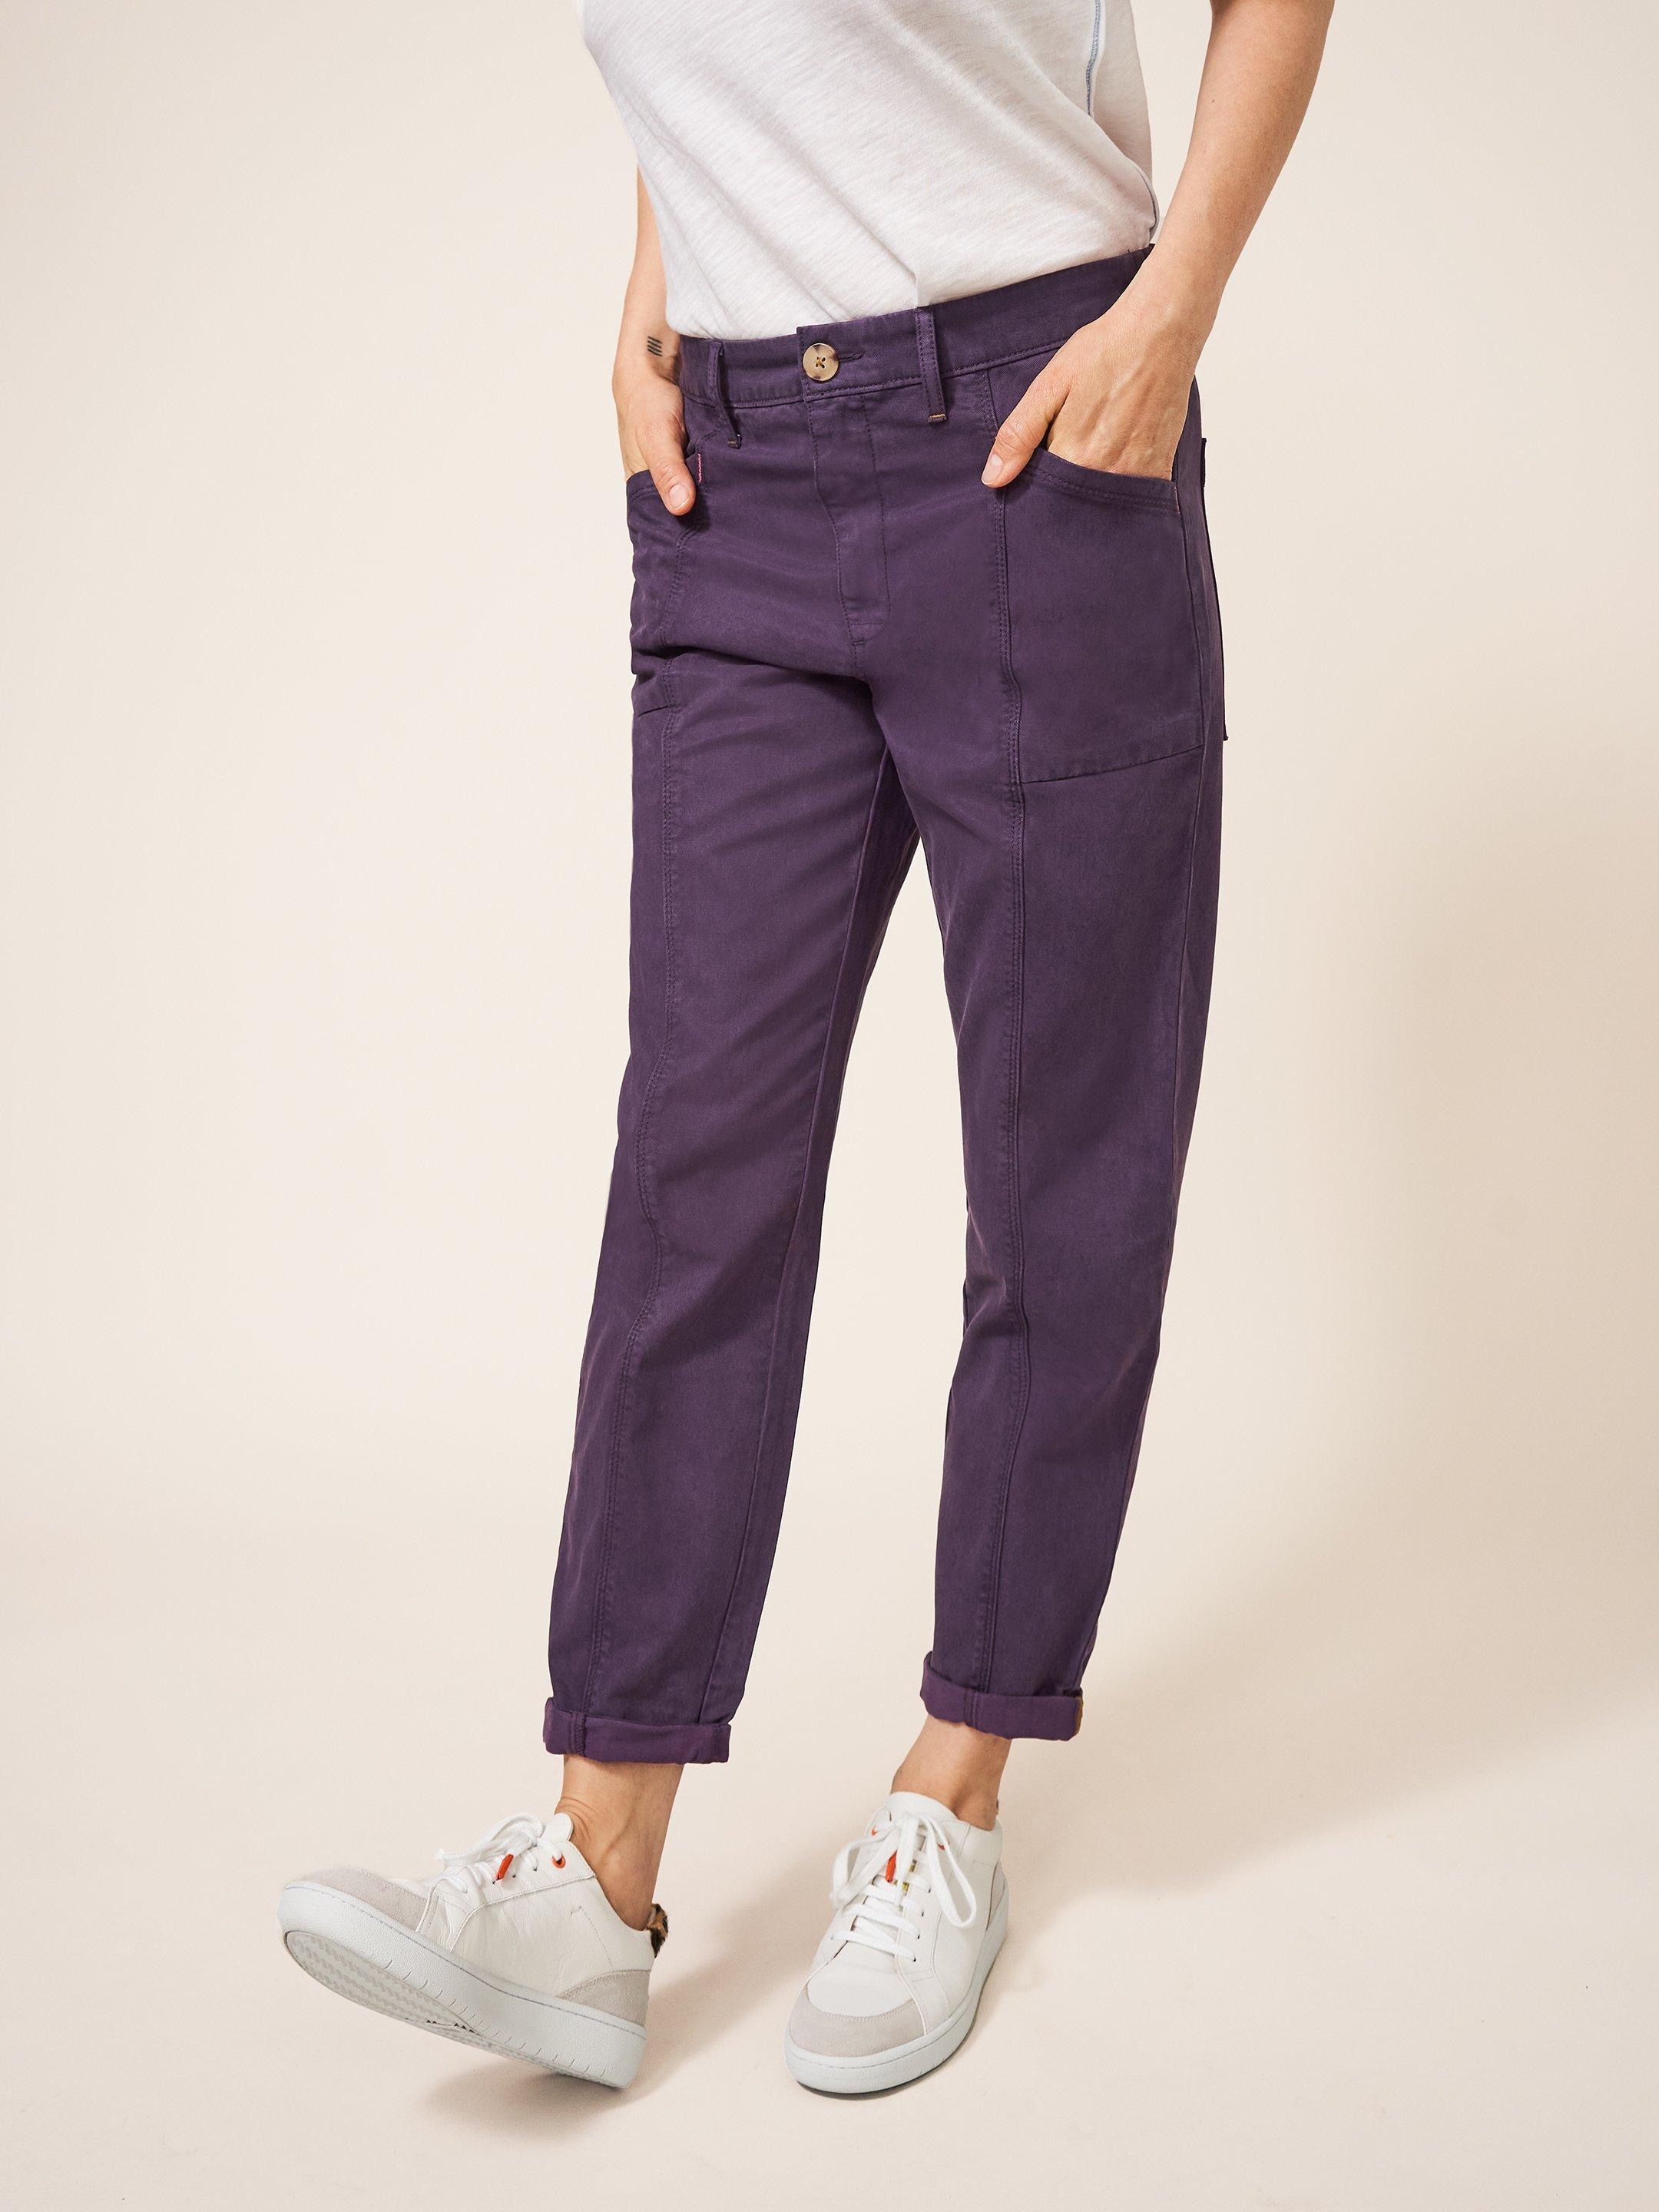 Thea Tapered Trouser in DK PURPLE - MODEL FRONT